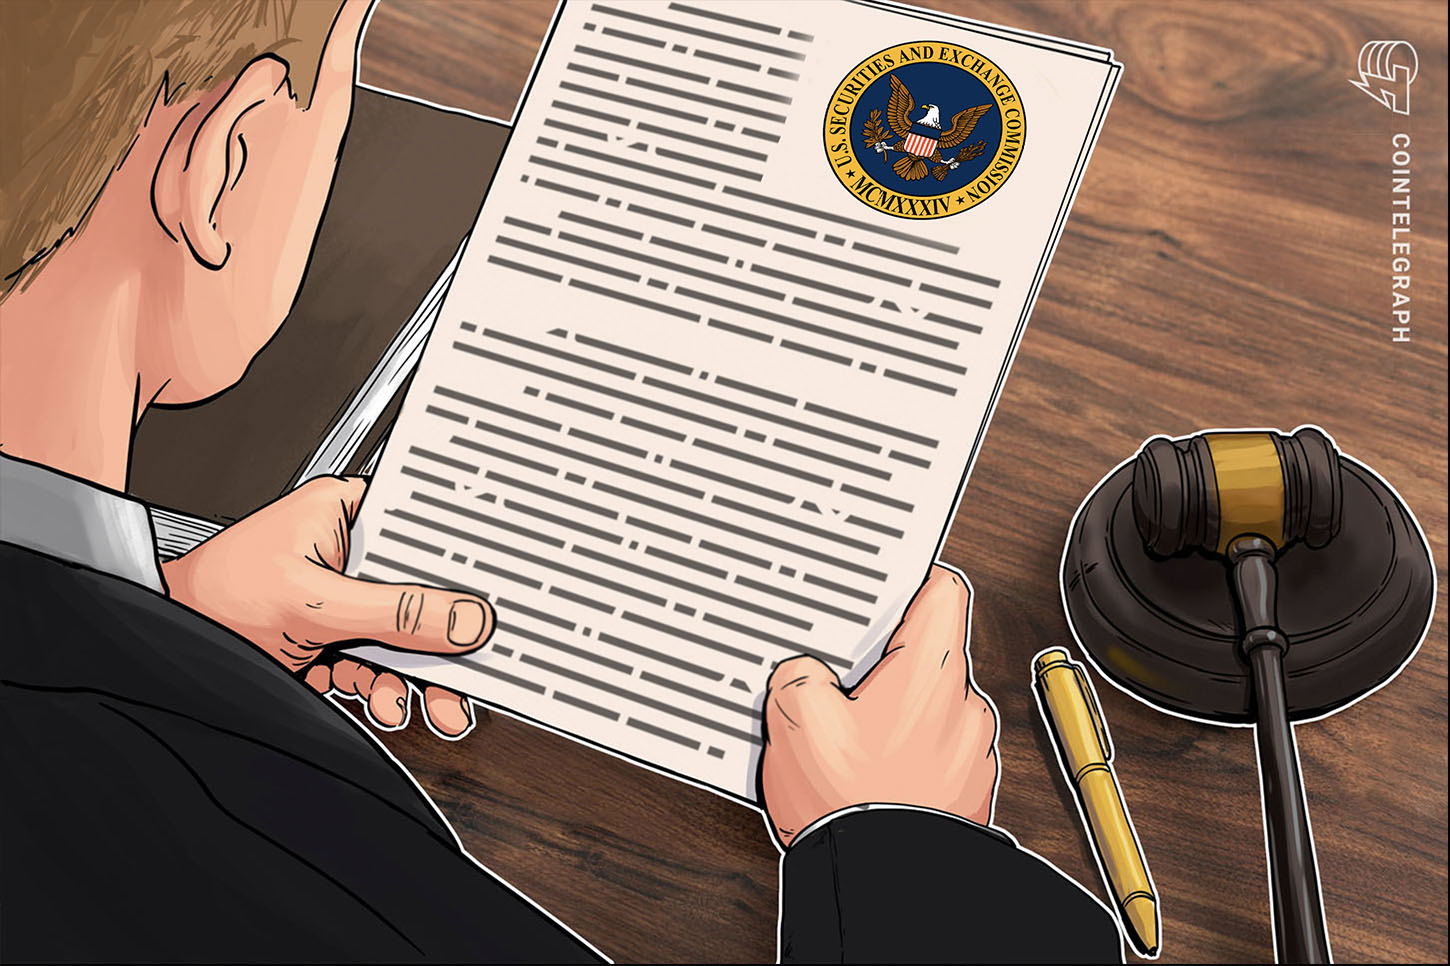 sec set to sue ripple with xrp in the crosshairs